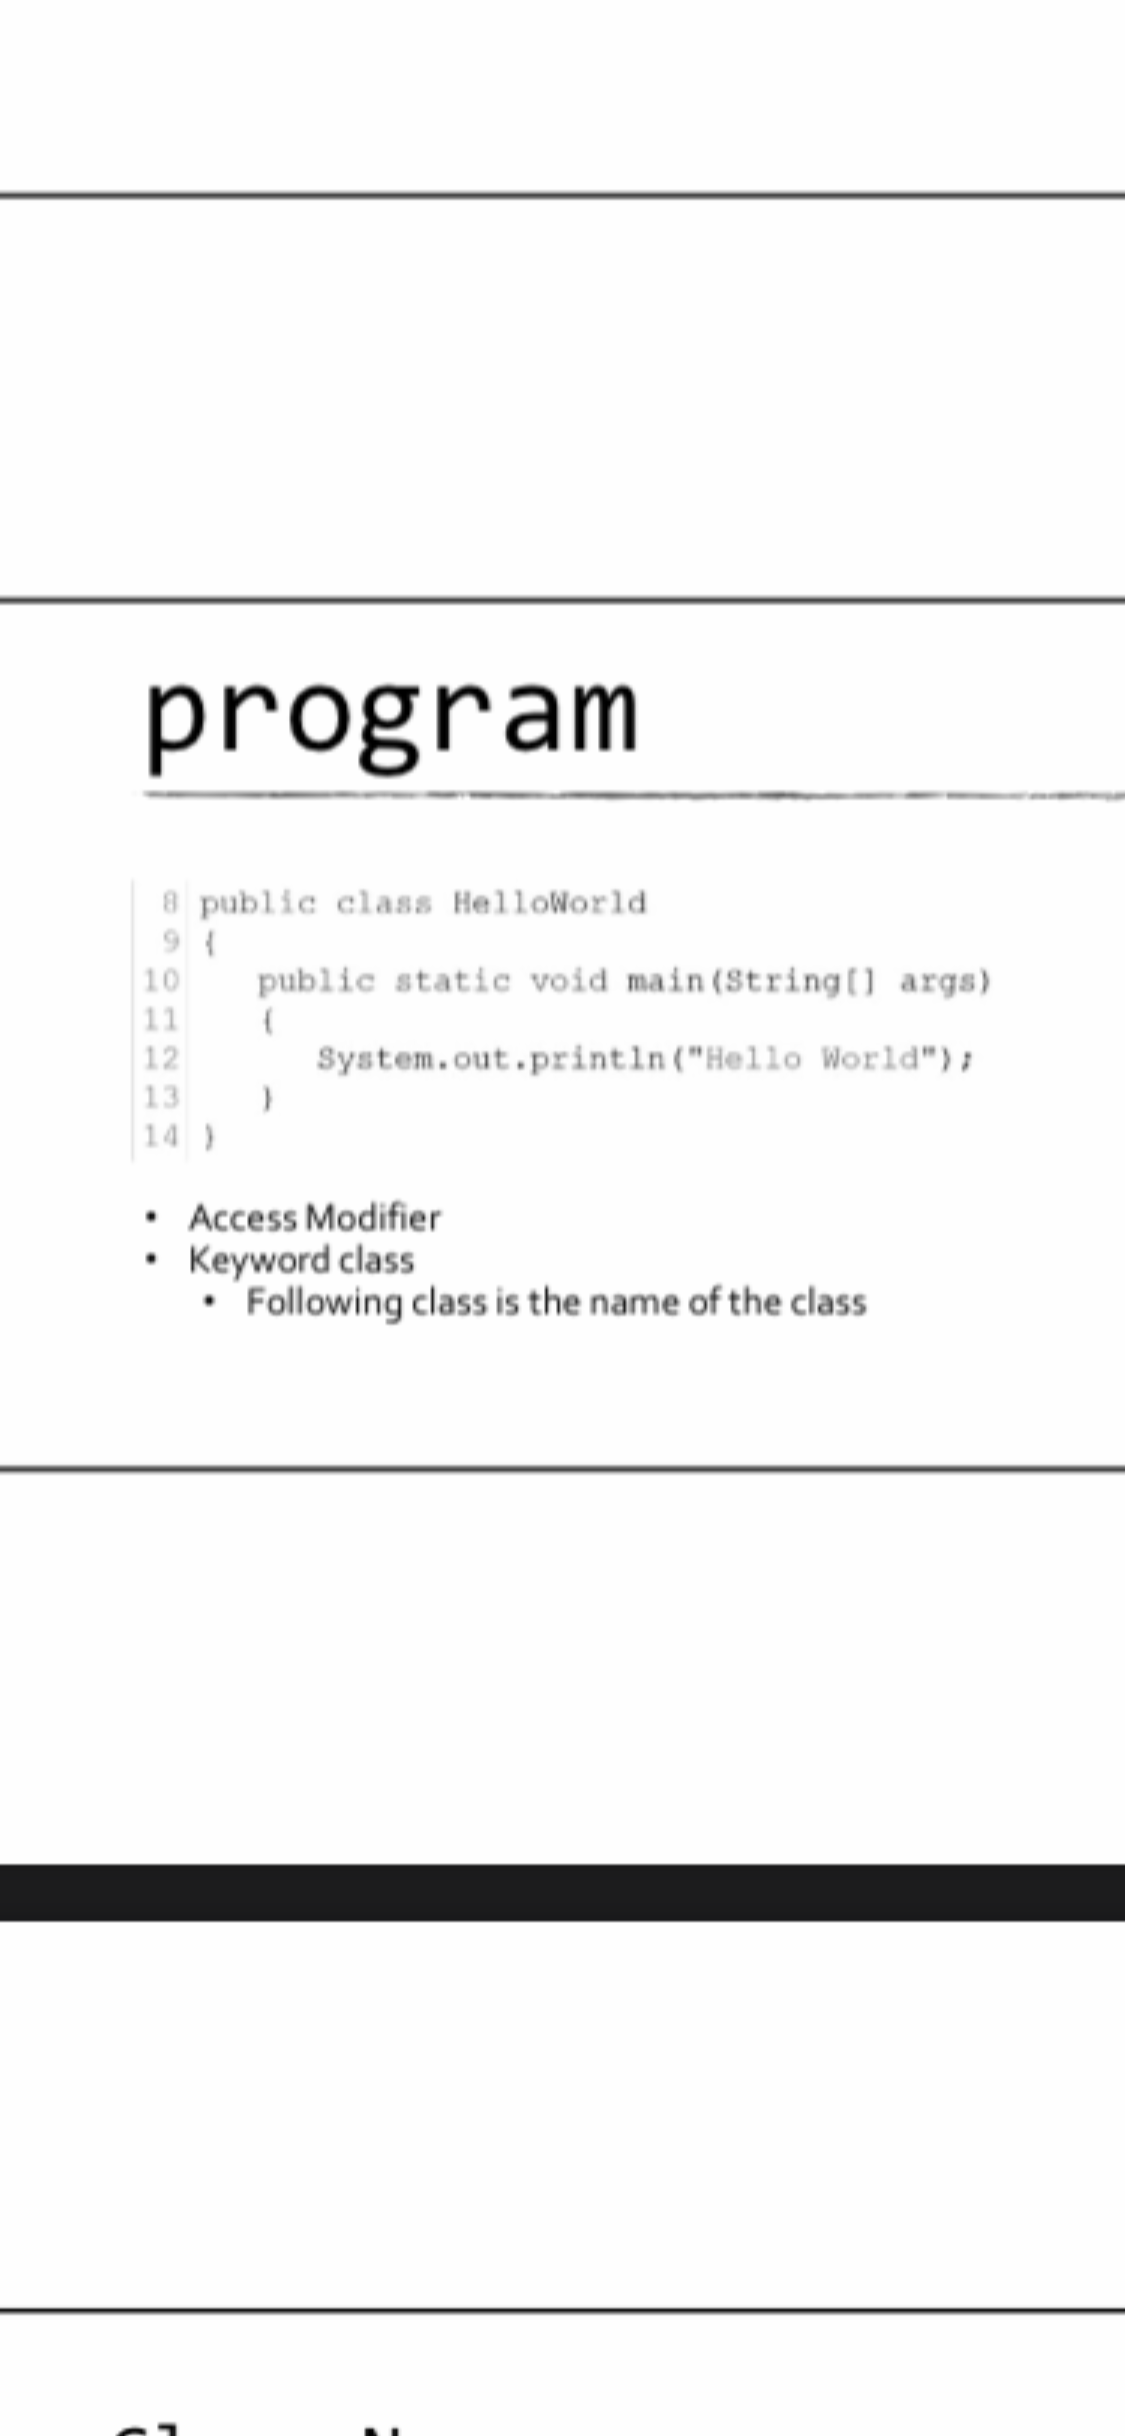 program
8 public class HelloWorld
public static void main(String[] args)
10
11
12
System.out.println("Hello World");
13
14 )
Access Modifier
• Keyword class
• Following class is the name of the class
